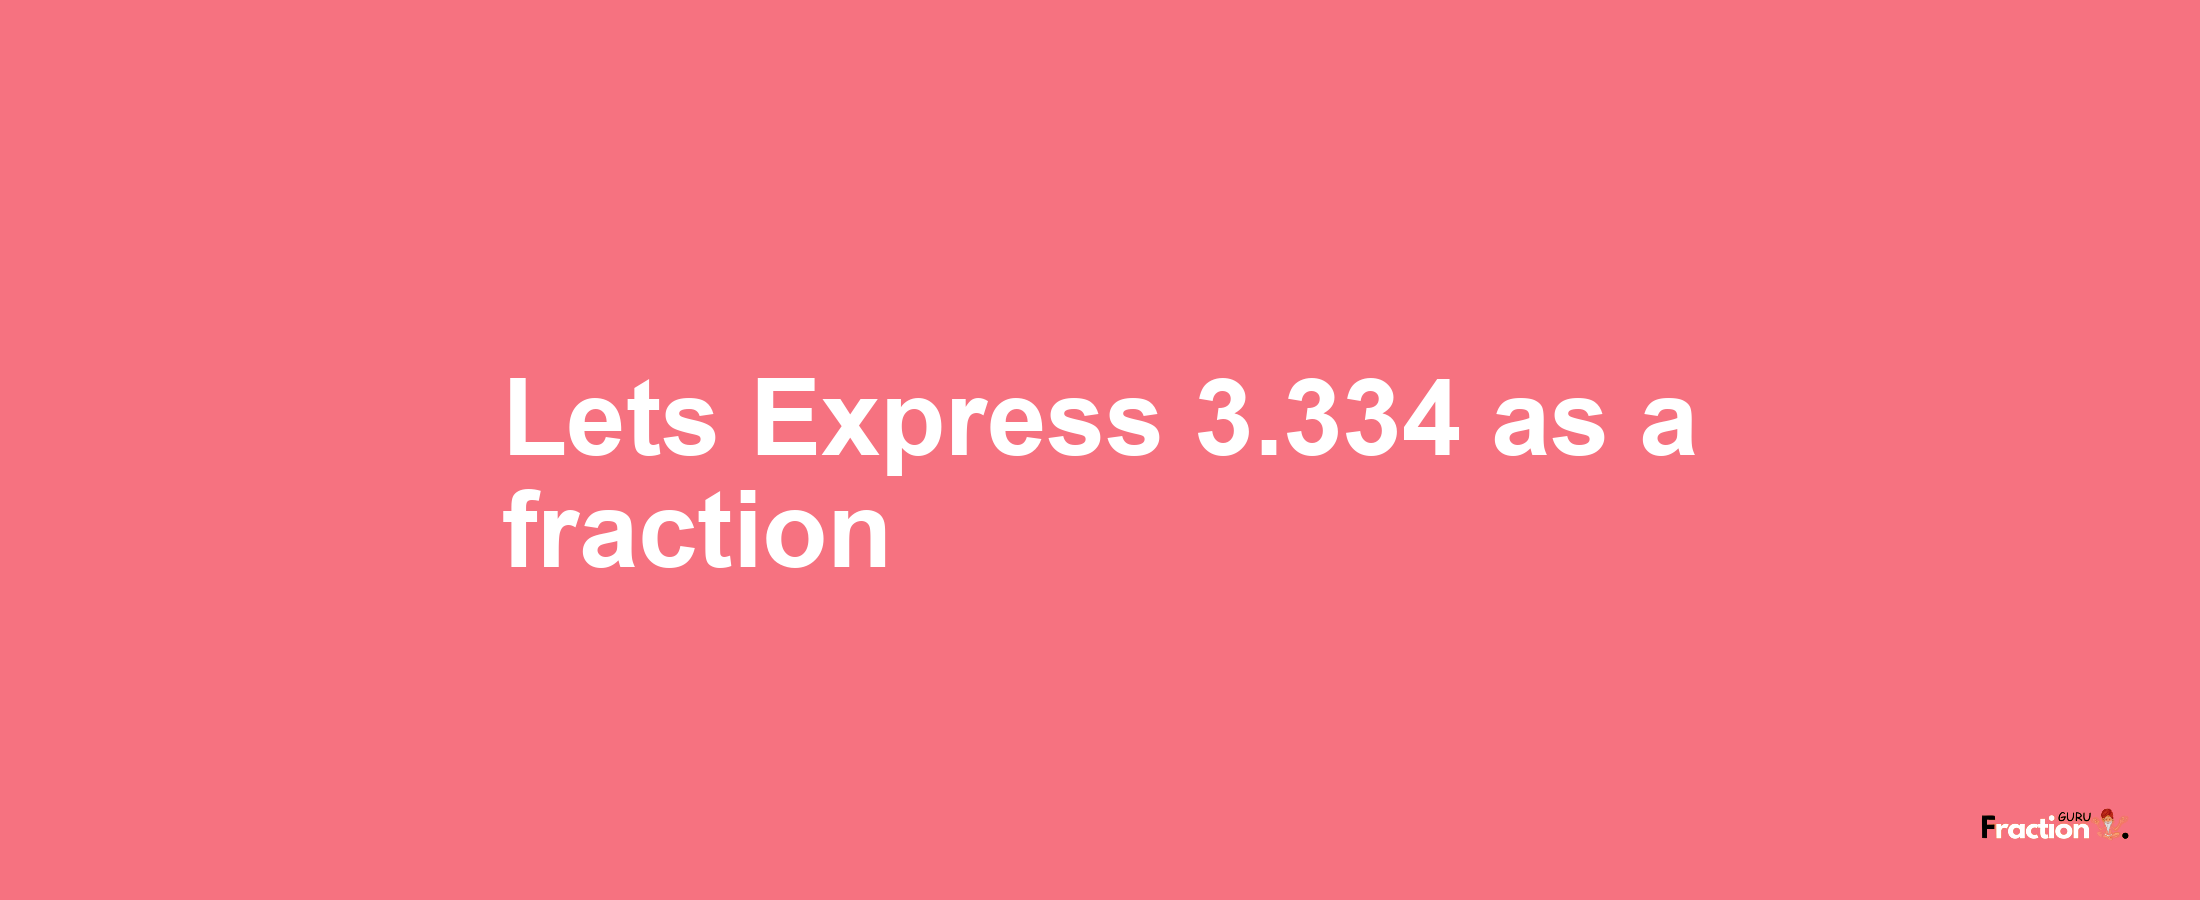 Lets Express 3.334 as afraction